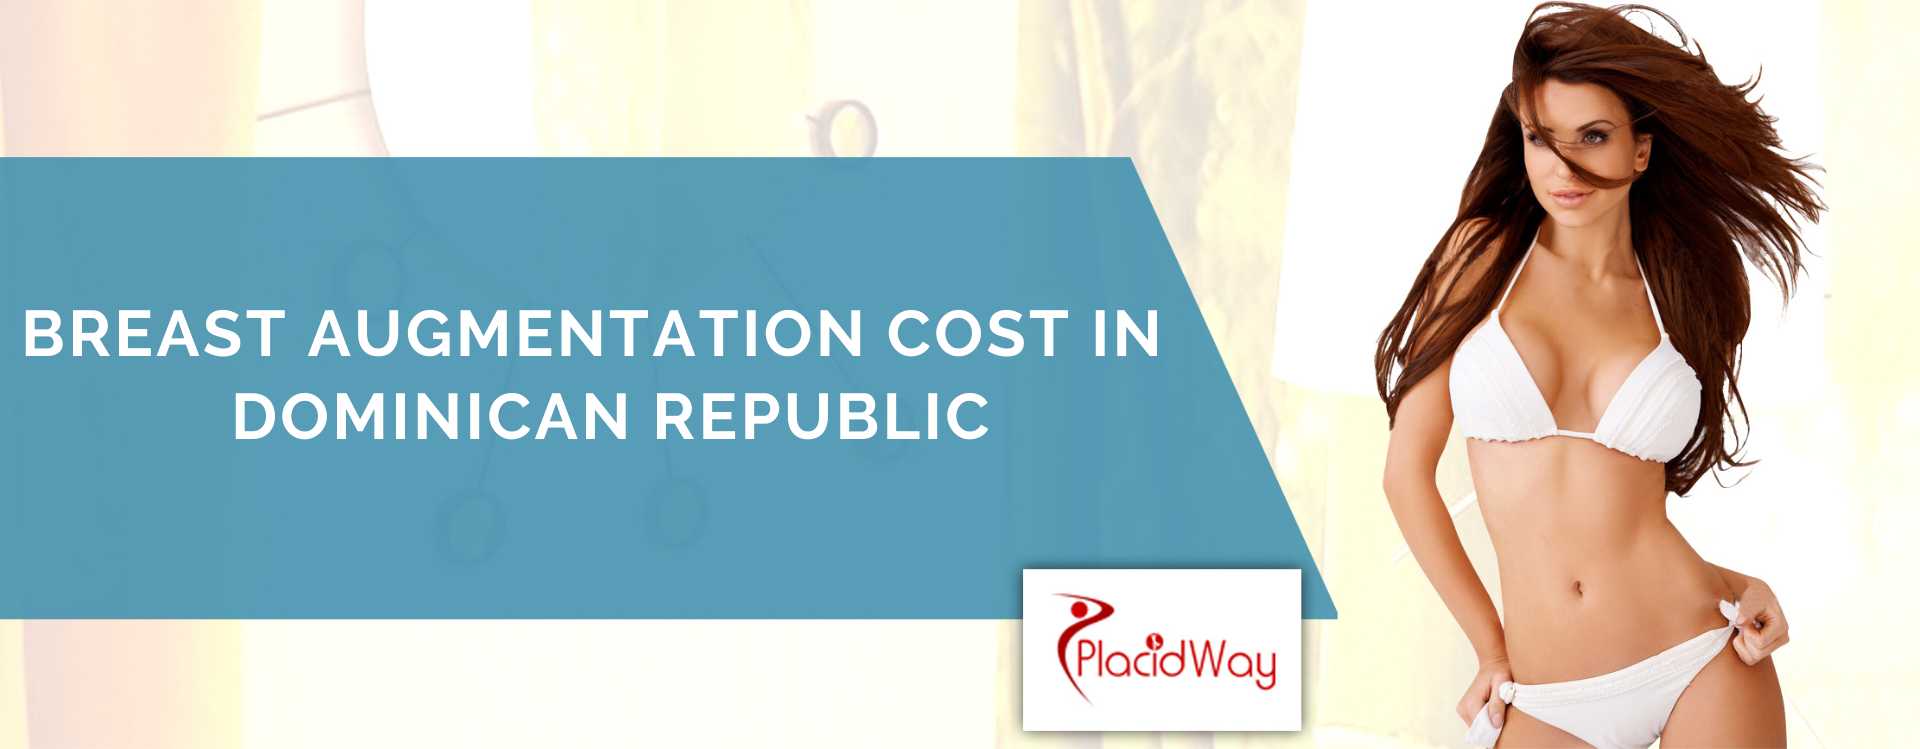 Cost of Breast Augmentation in Dominican Republic is $3,000